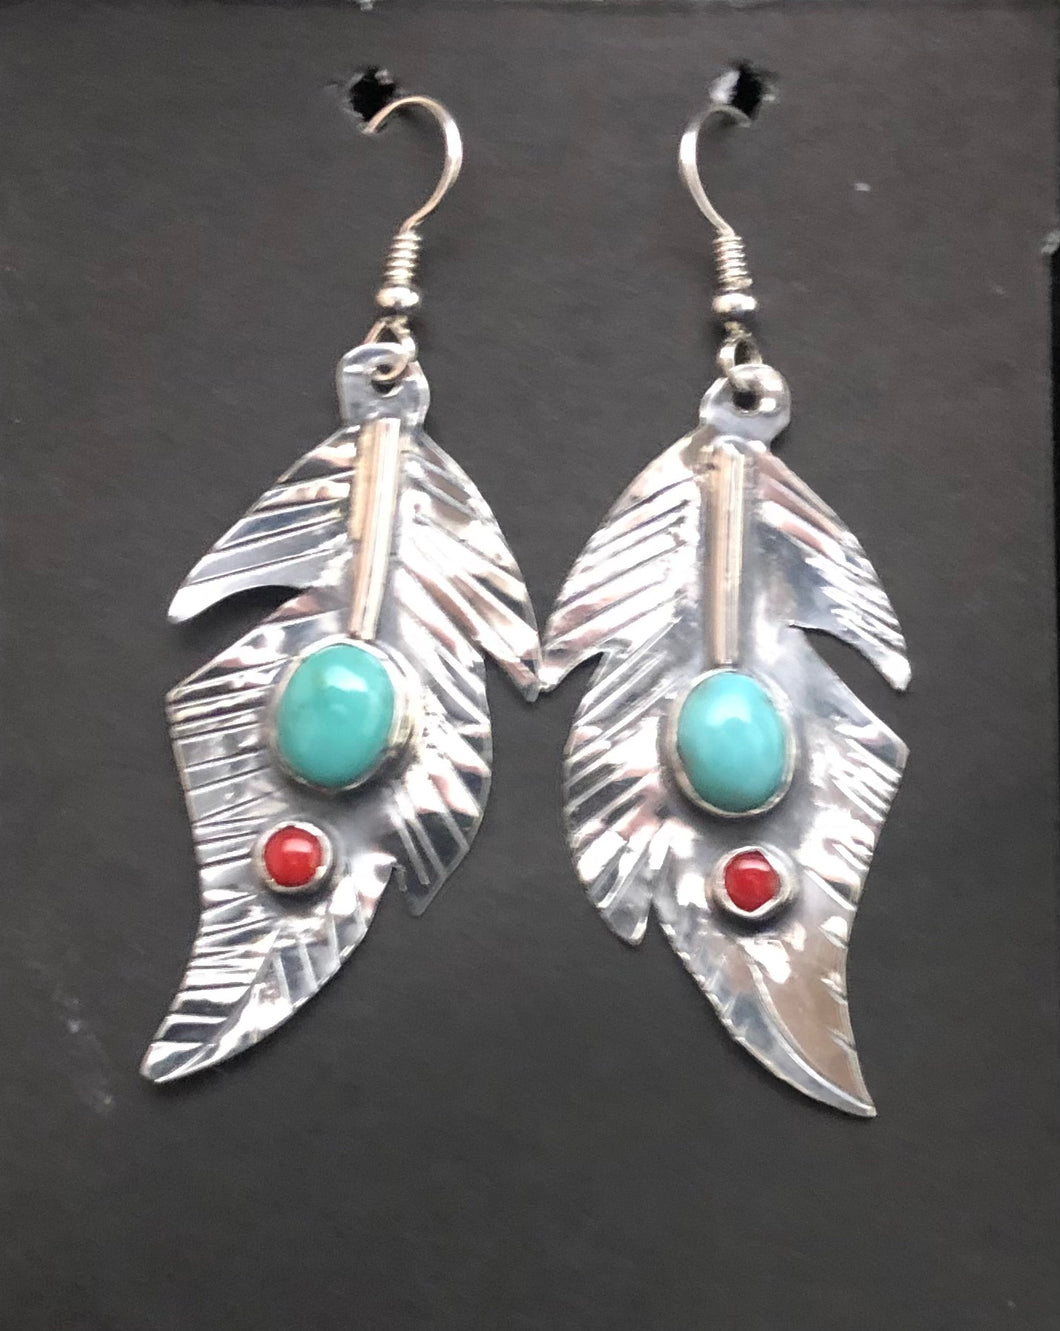 Turquoise & Coral Sterling Silver Feather Earrings